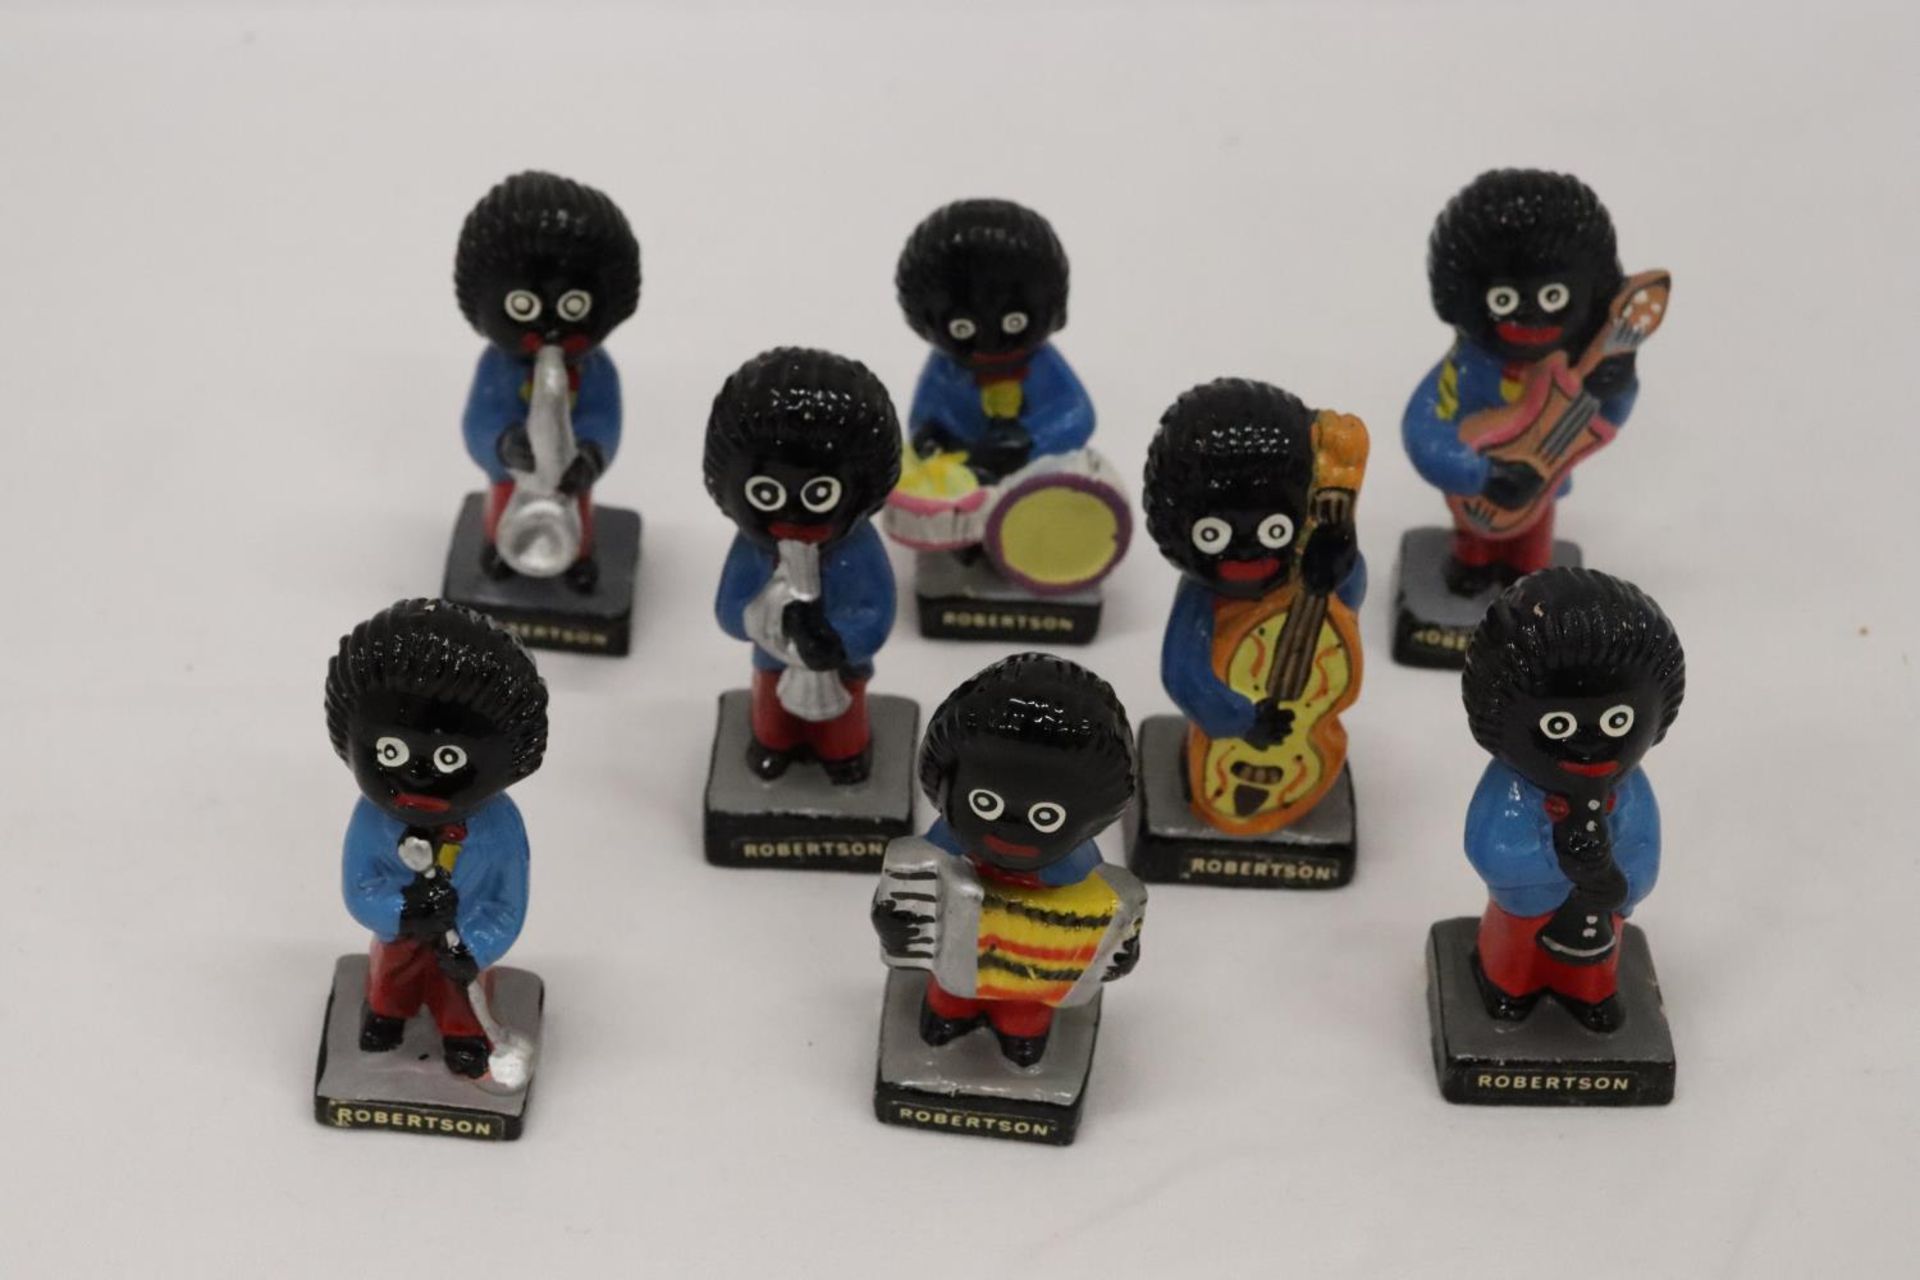 A COLLECTION OF VINTAGE ROBERTSONS FIGURES BAND MEMBERS - 9 IN TOTAL, 1 A/F